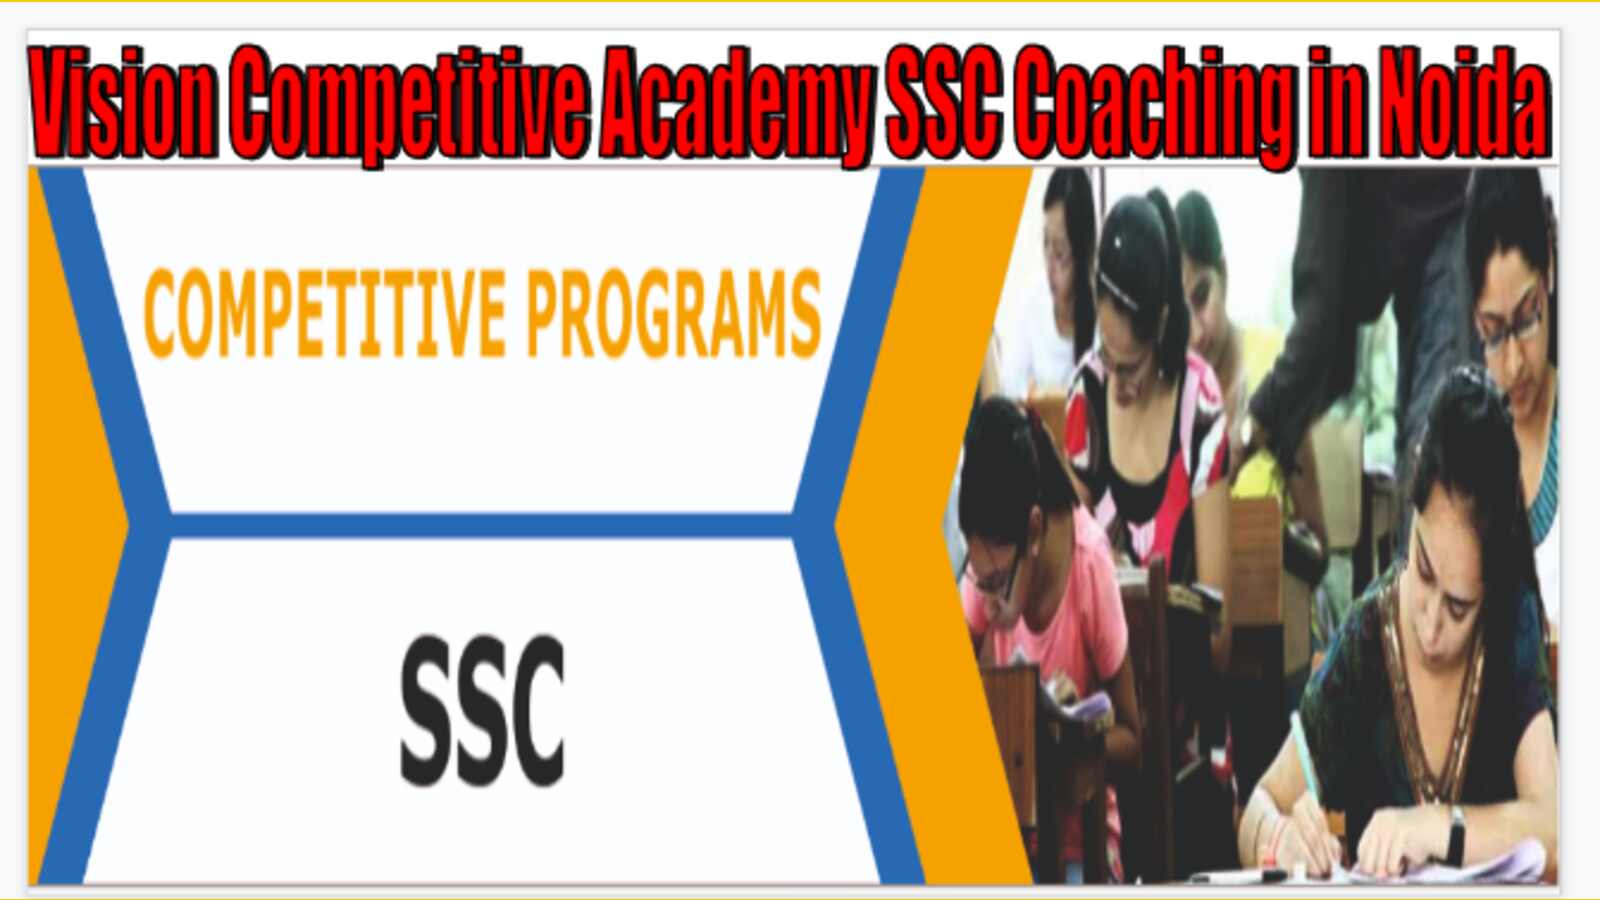 Vision Competitive Academy SSC Coaching in Noida